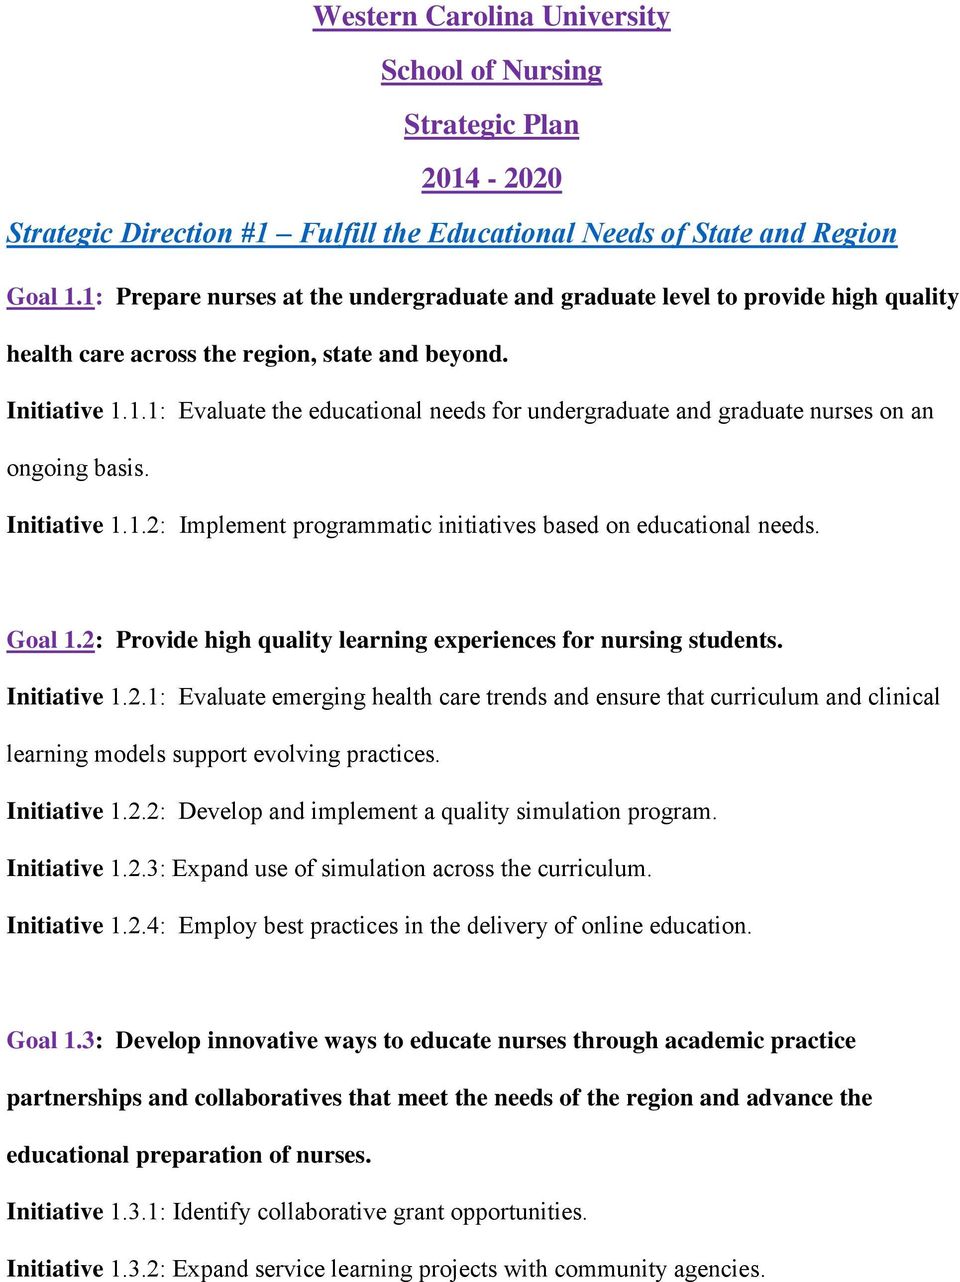 Initiative 1.1.2: Implement programmatic initiatives based on educational needs. Goal 1.2: Provide high quality learning experiences for nursing students. Initiative 1.2.1: Evaluate emerging health care trends and ensure that curriculum and clinical learning models support evolving practices.